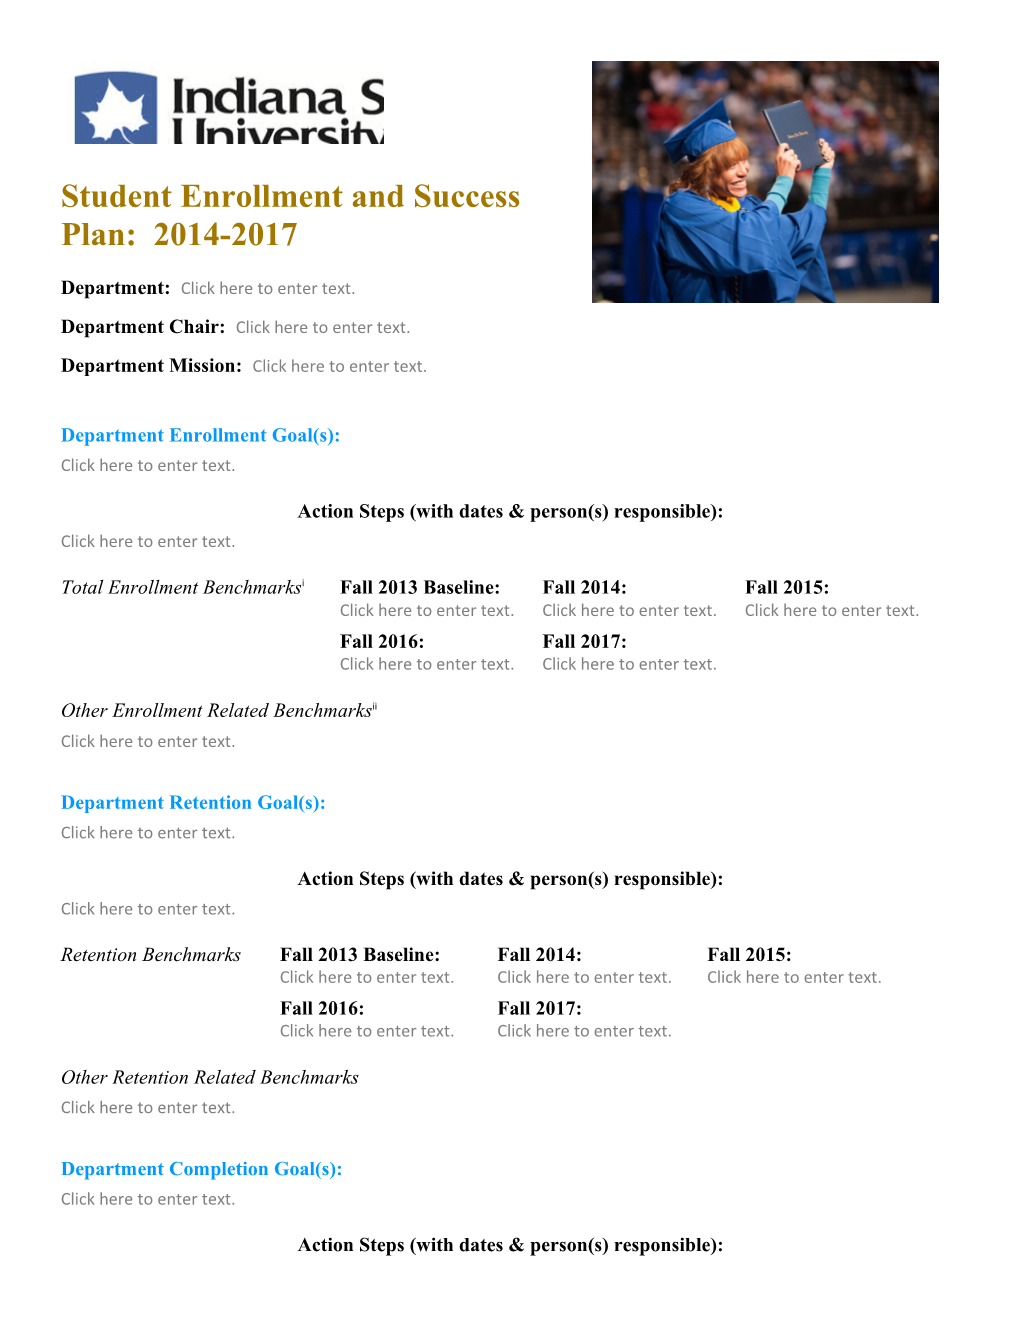 Student Enrollment and Success Plan: 2014-2017